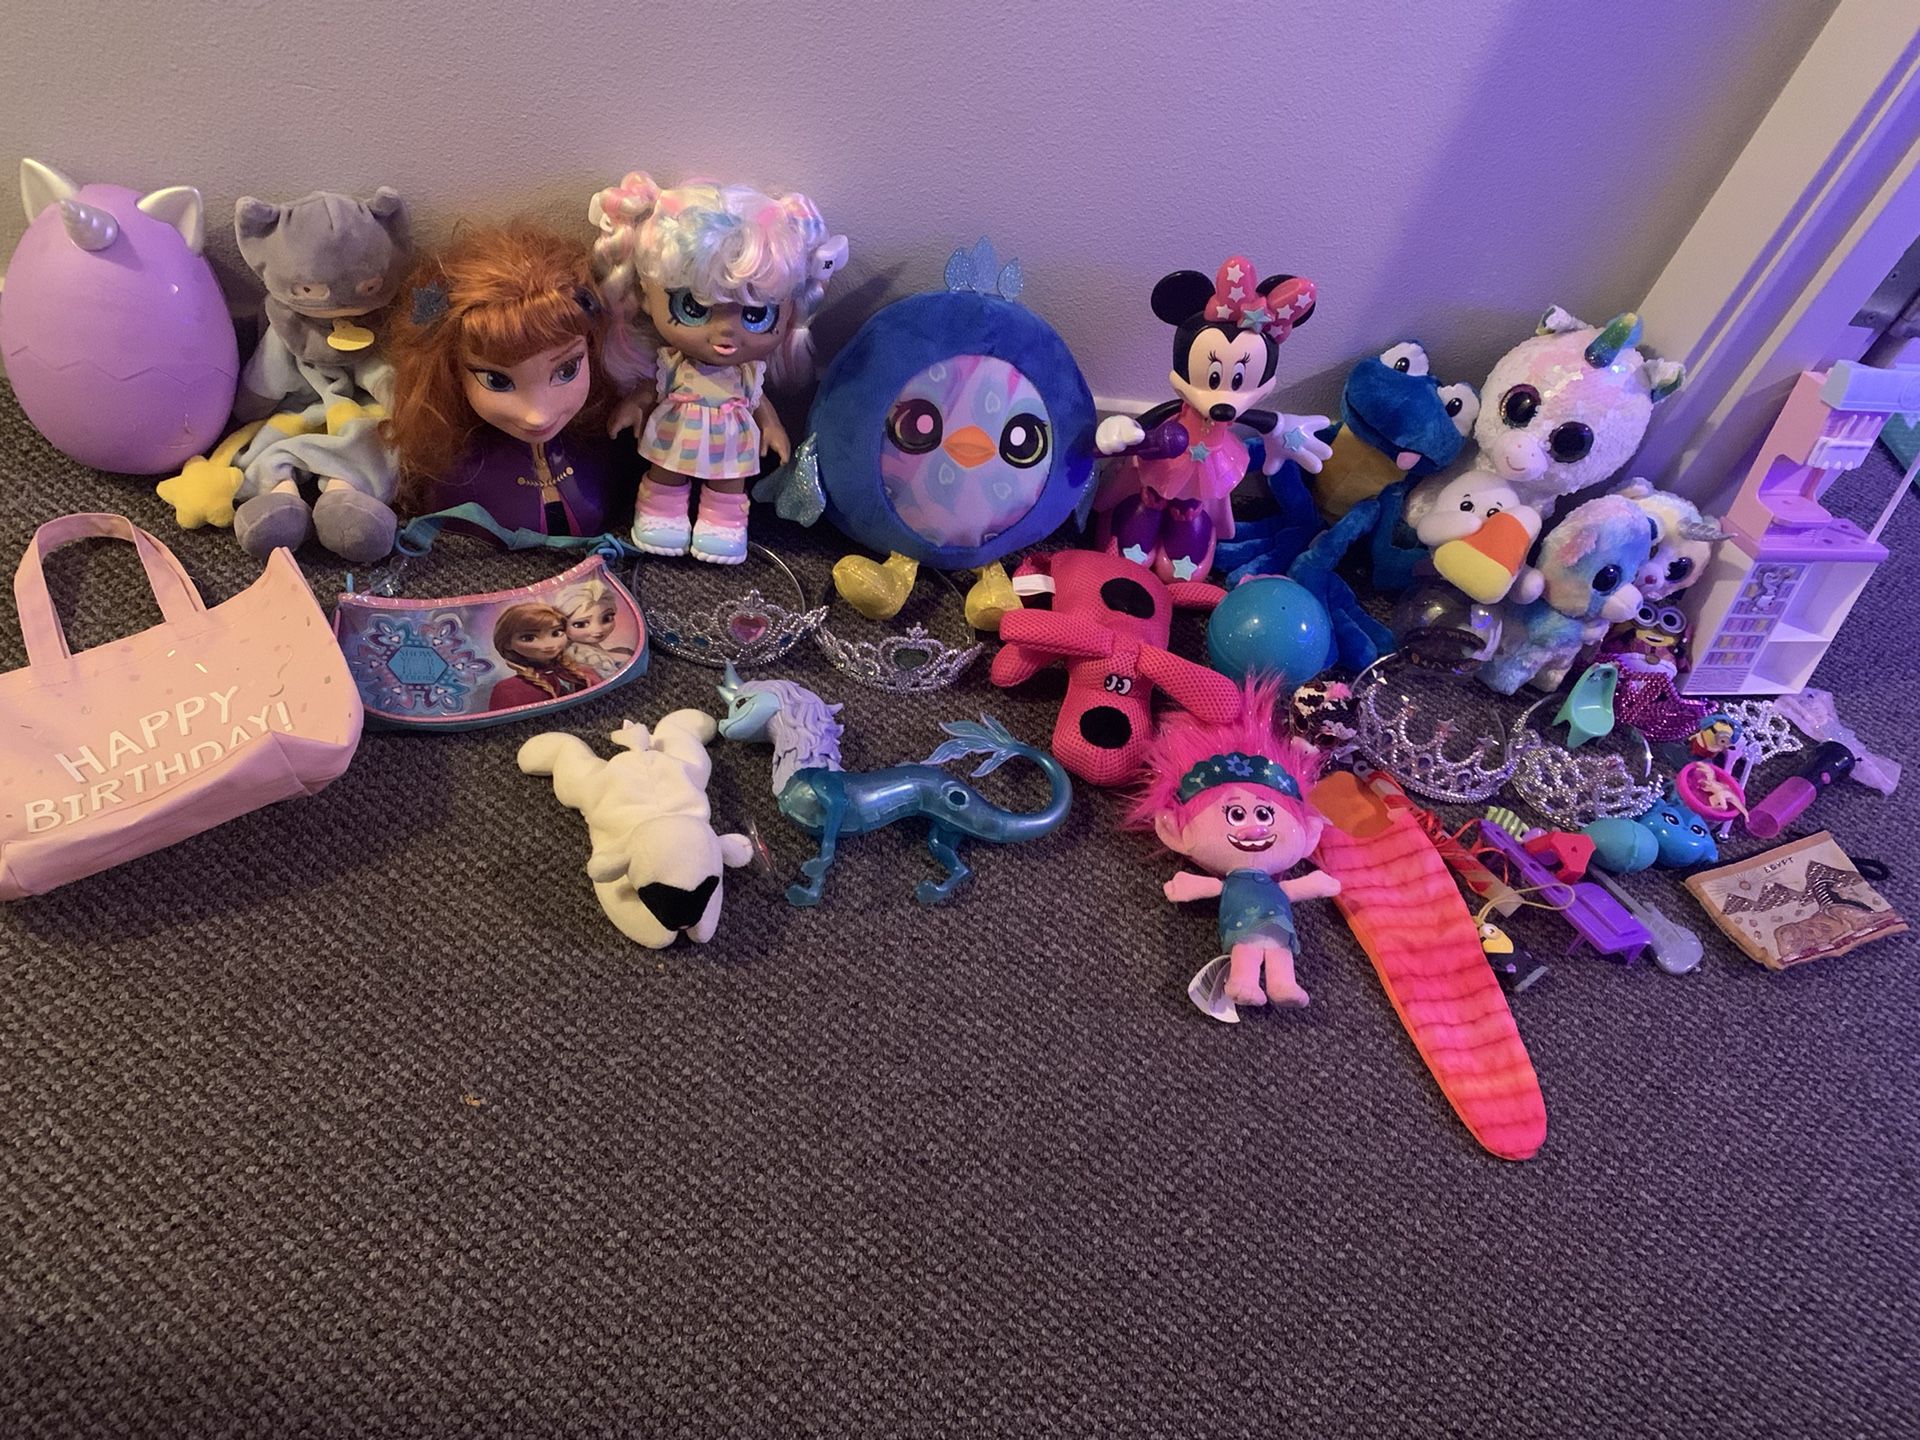 Girls fun toy lot.  Includes Elsa Anna frozen toys, stuffy’s, unicorns, fun dolls, trolls, purses, Minnie Mouse dancing and light up sing along toy., 